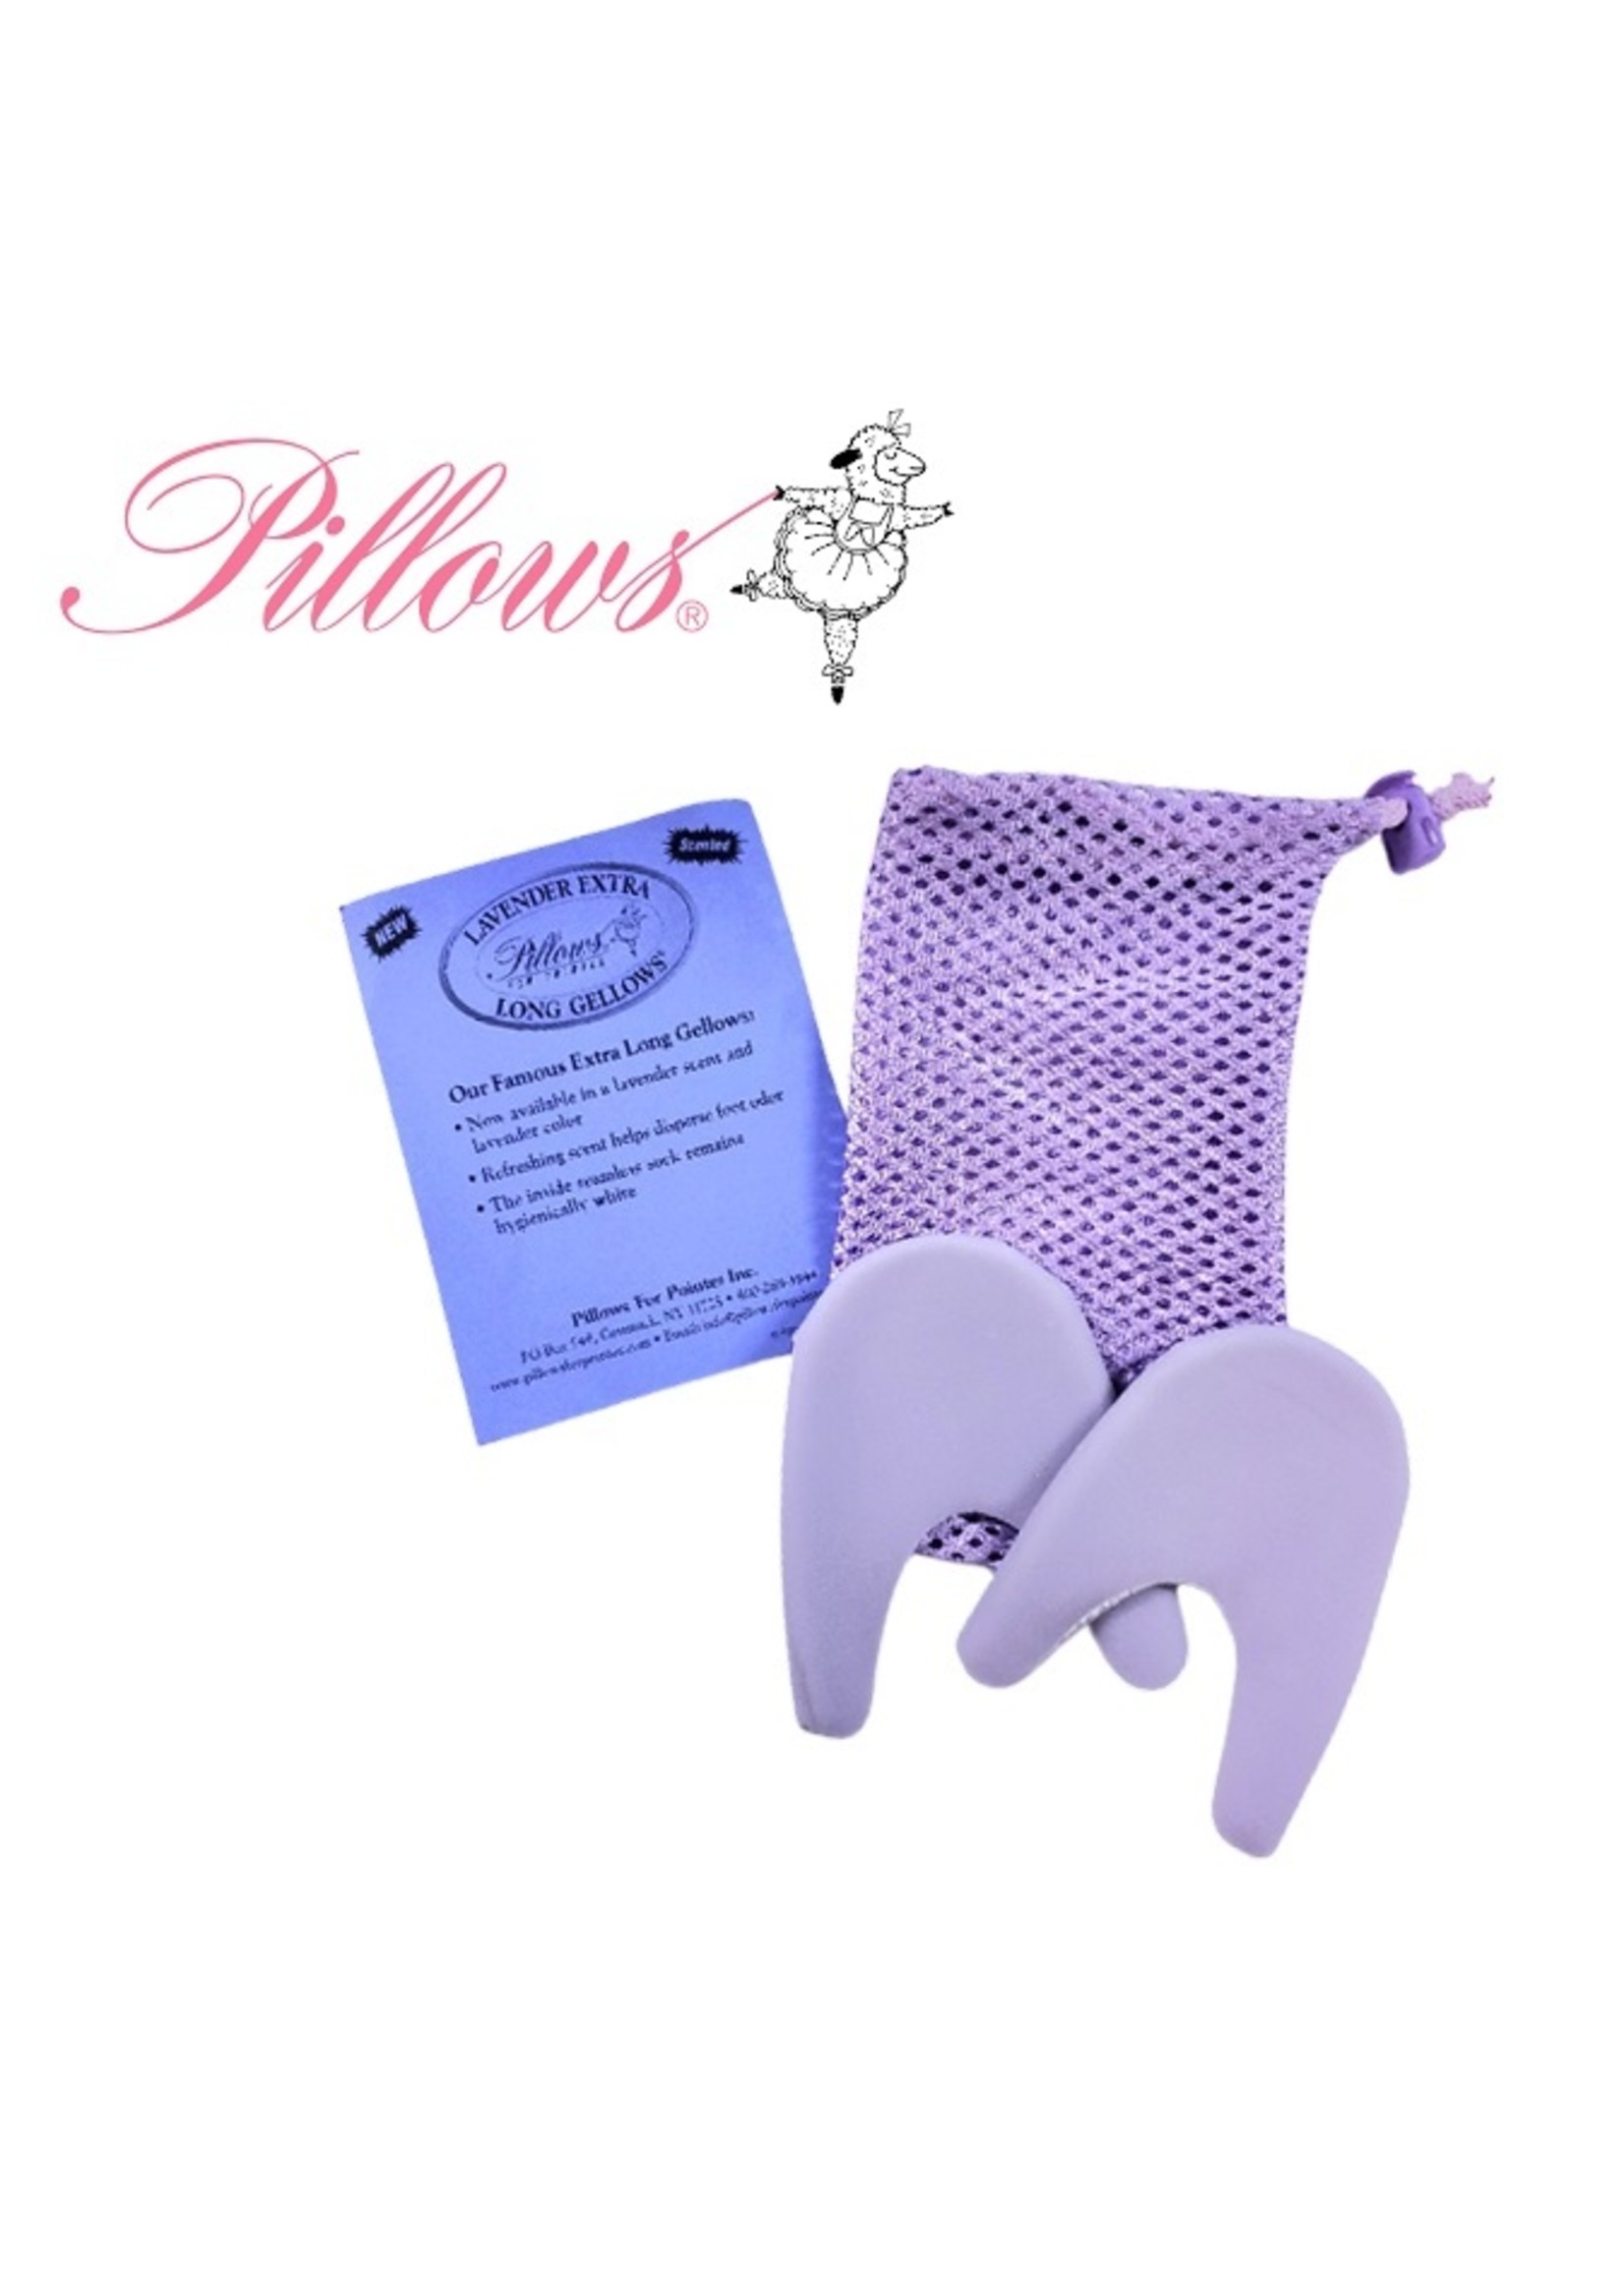 PILLOWS FOR POINTES LAVENDER SCENTED GELLOWS FOR POINTES GELX